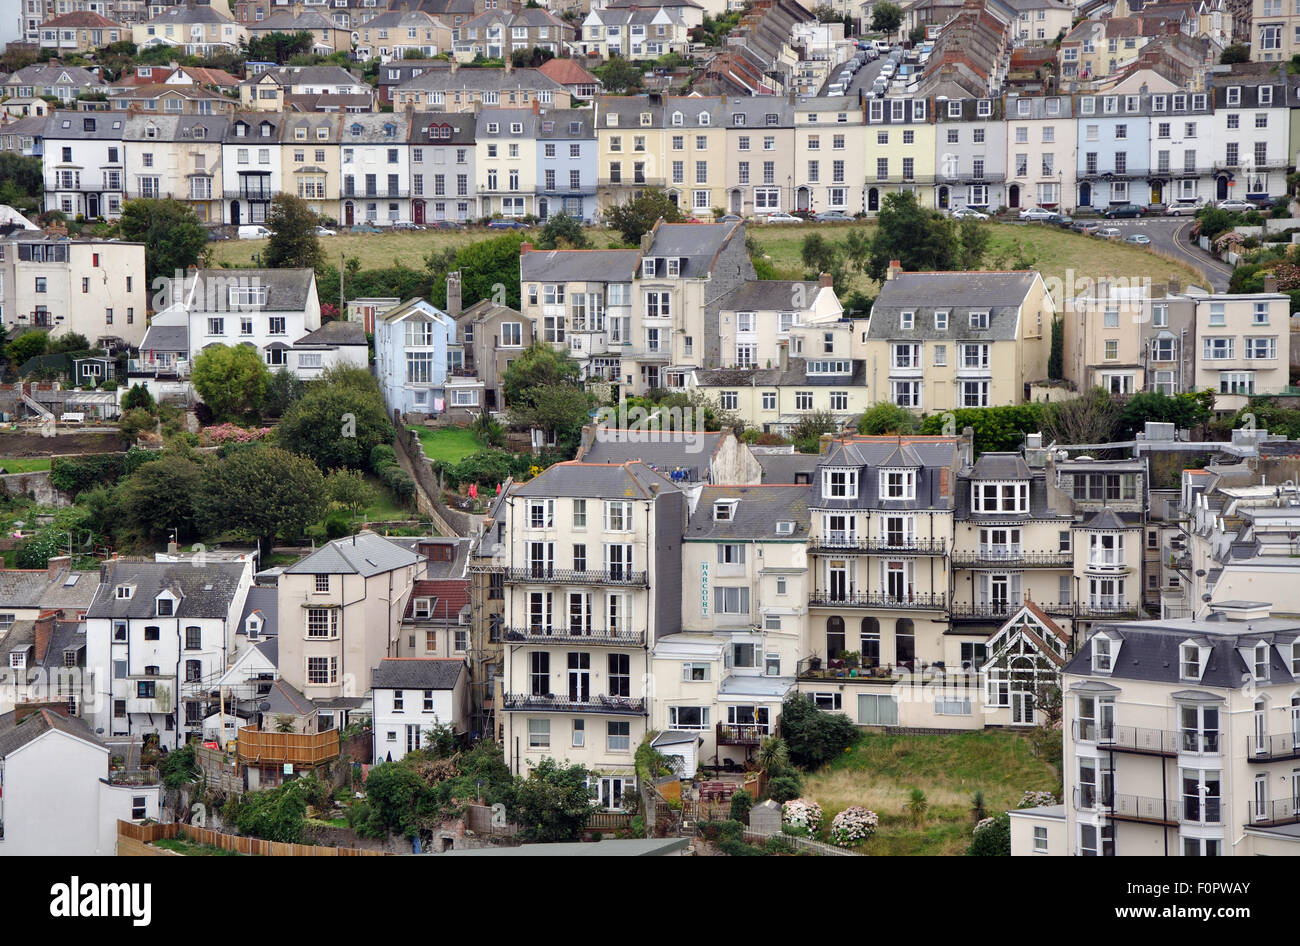 view of housing on a hillside, Ifracombe, Devon, England, UK Stock Photo